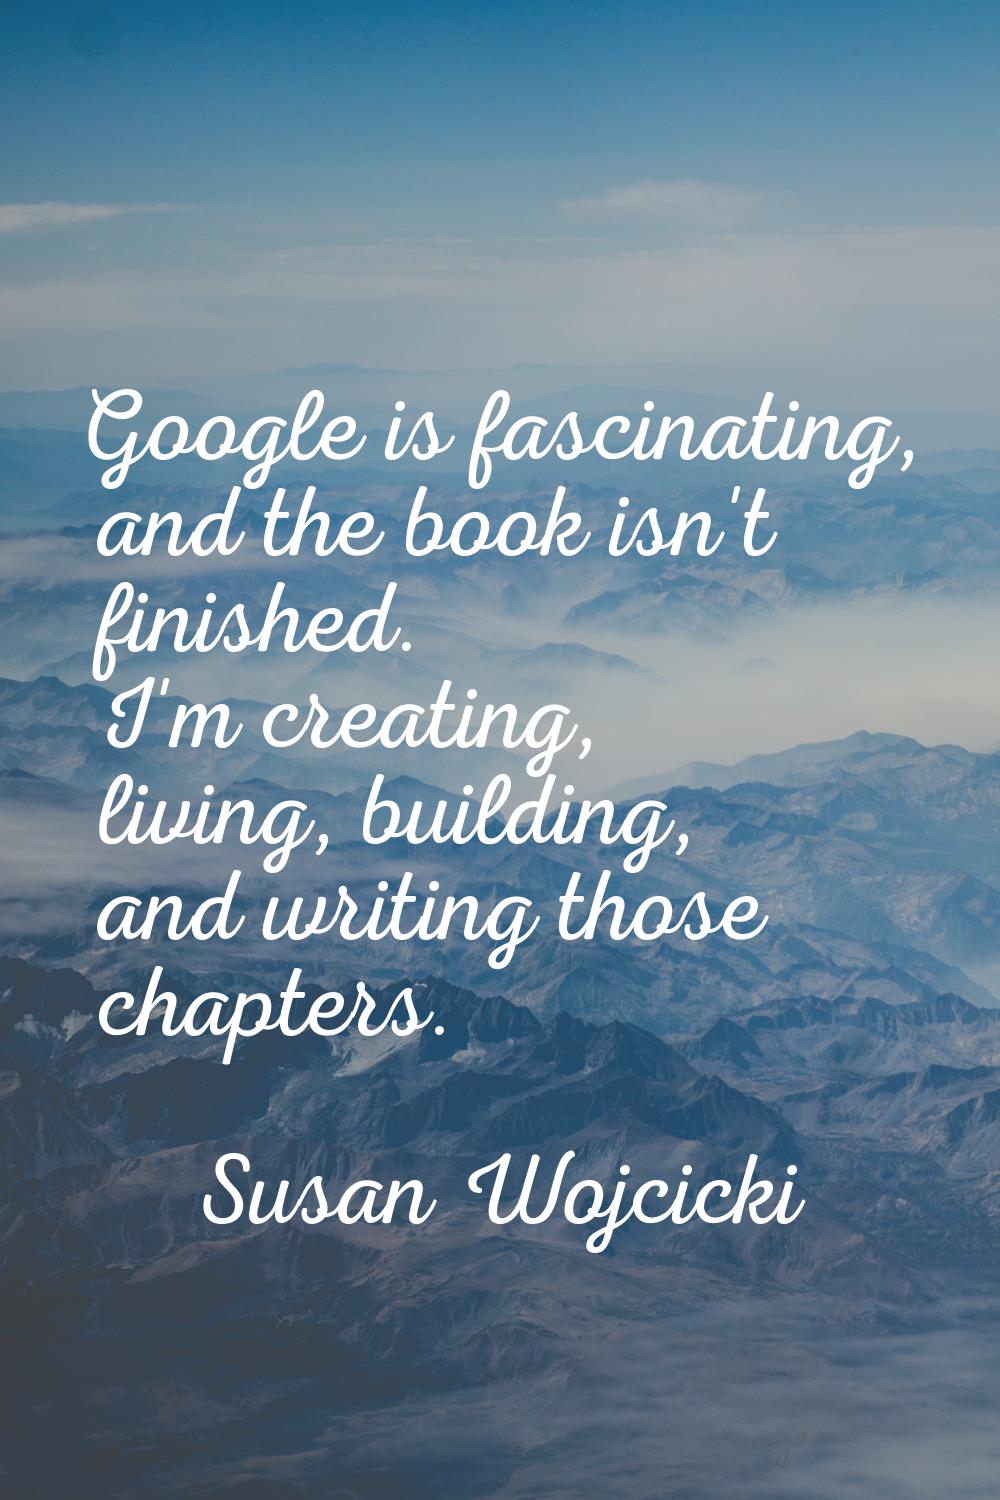 Google is fascinating, and the book isn't finished. I'm creating, living, building, and writing tho